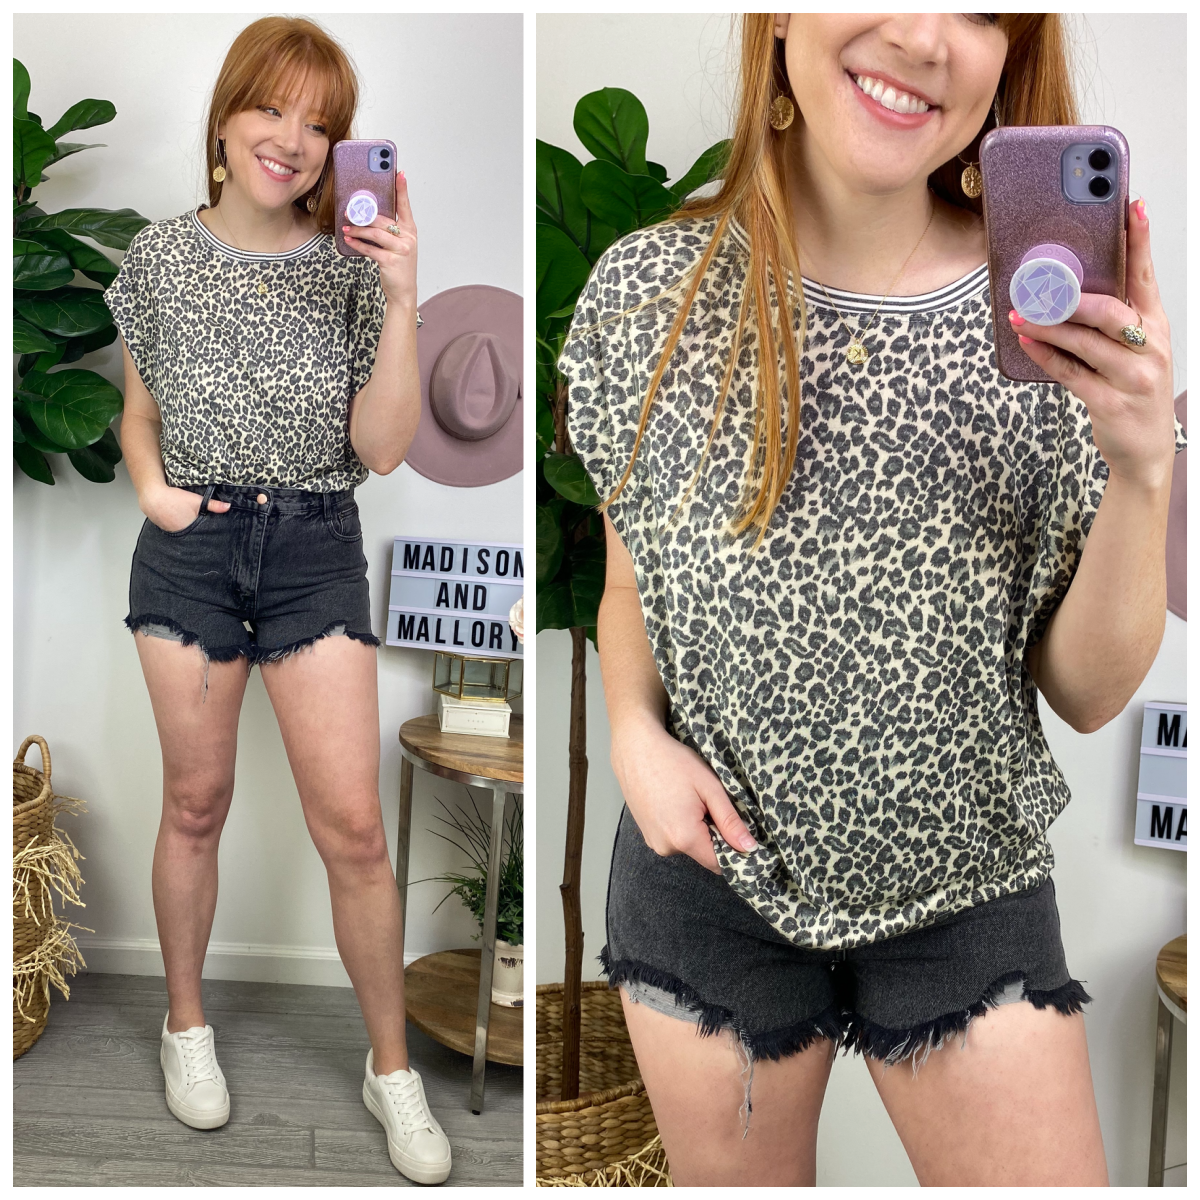  Colbert Relaxed Fit Animal Print Top - Madison and Mallory